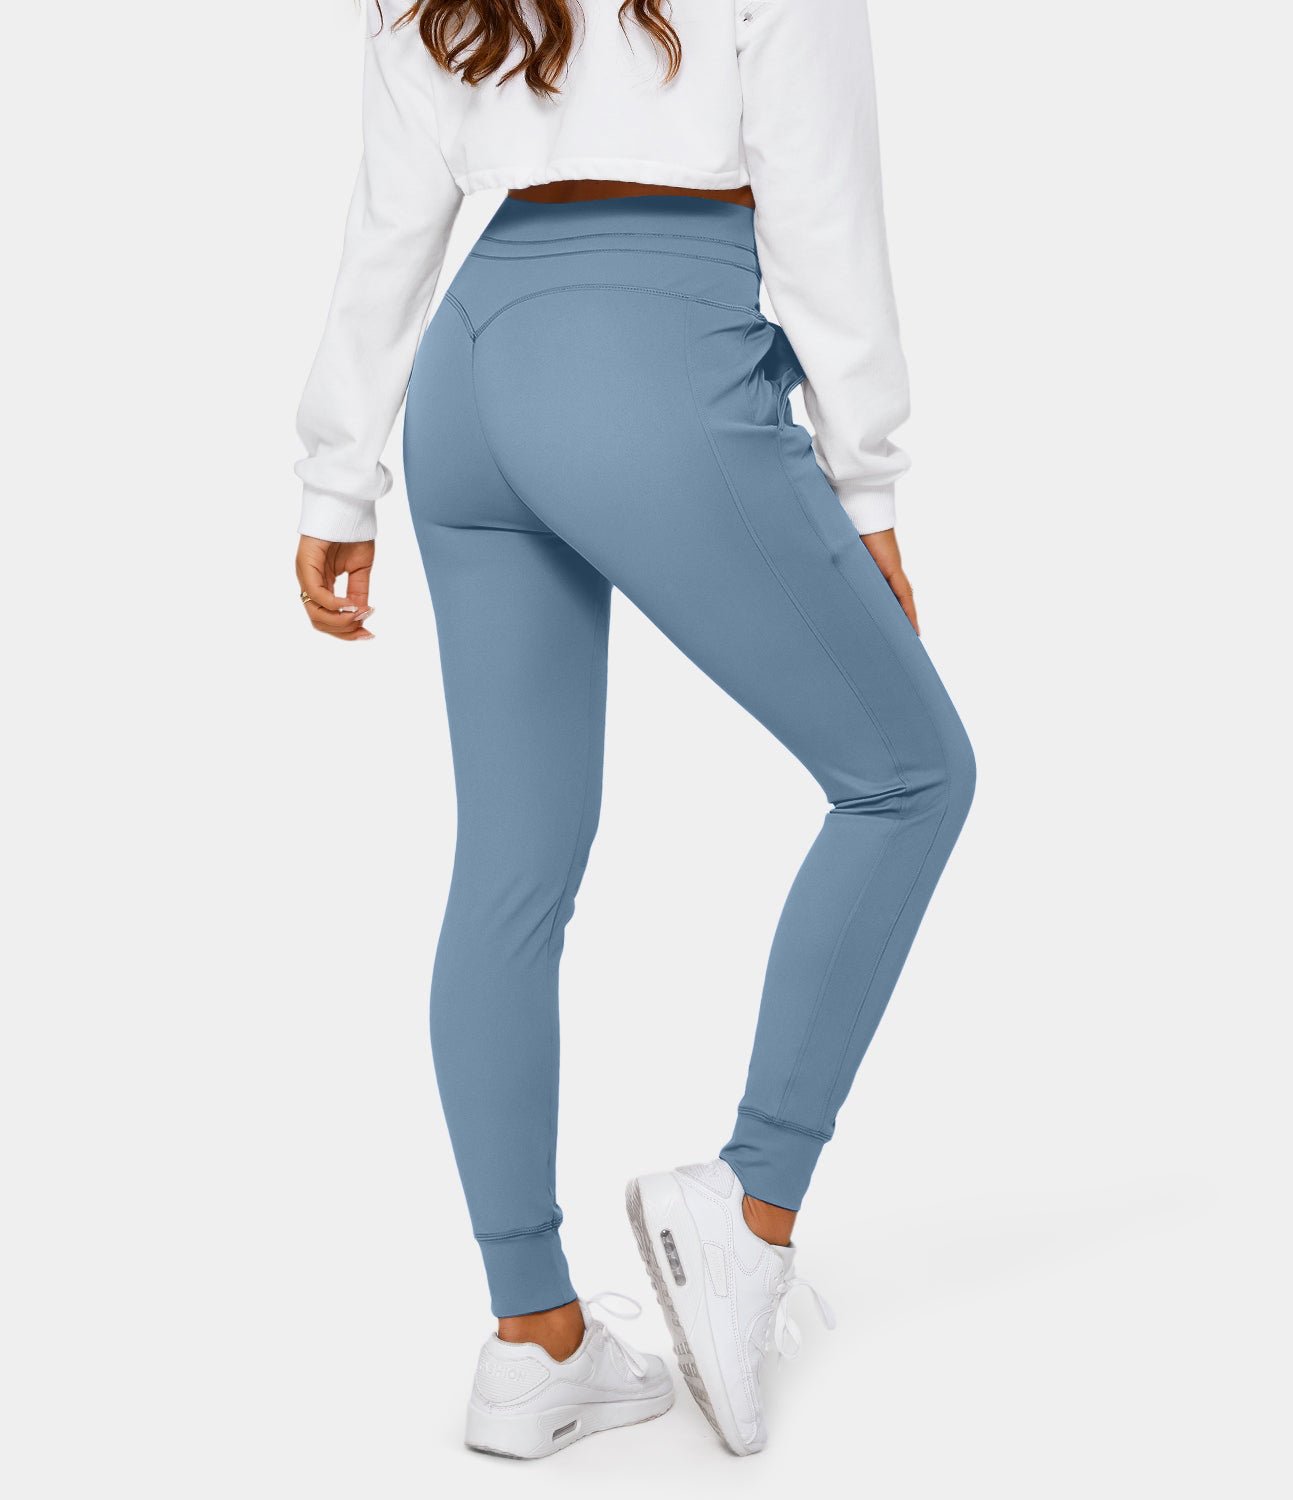 Sophie™ | sweatpants with high waistband, drawstring and side pockets